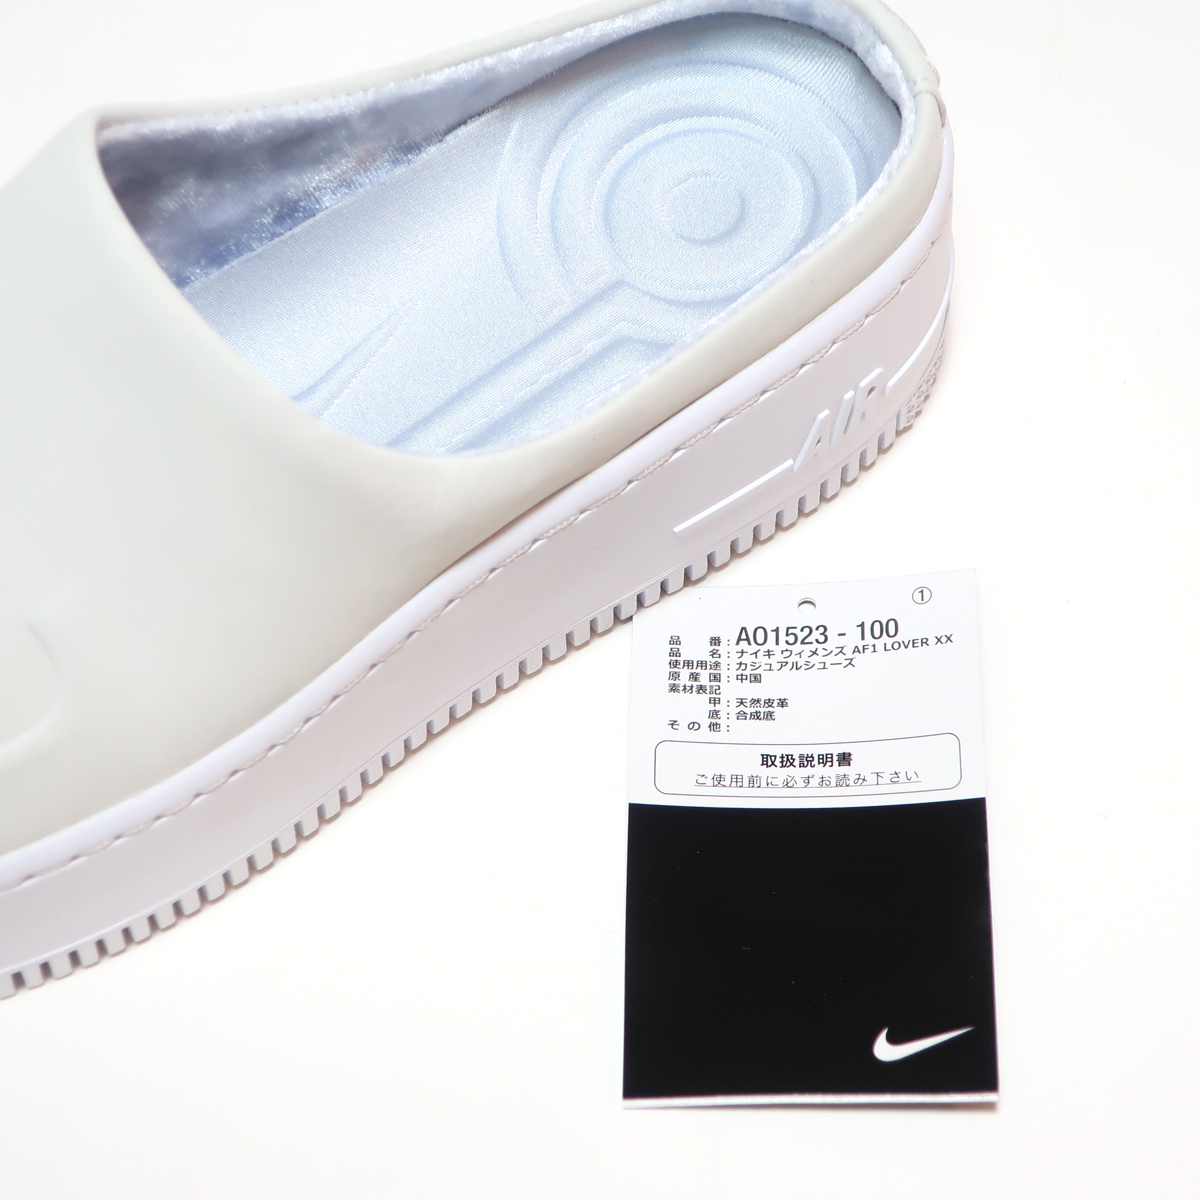 NIKE WMNS AF1 LOVER XX WMNS 24.5cm OFF WHITE/LIGHT SILVER AIR FORCE 1 ( ナイキ ウィメンズ エアフォース1 ラヴァ― オフホワイト )_画像9